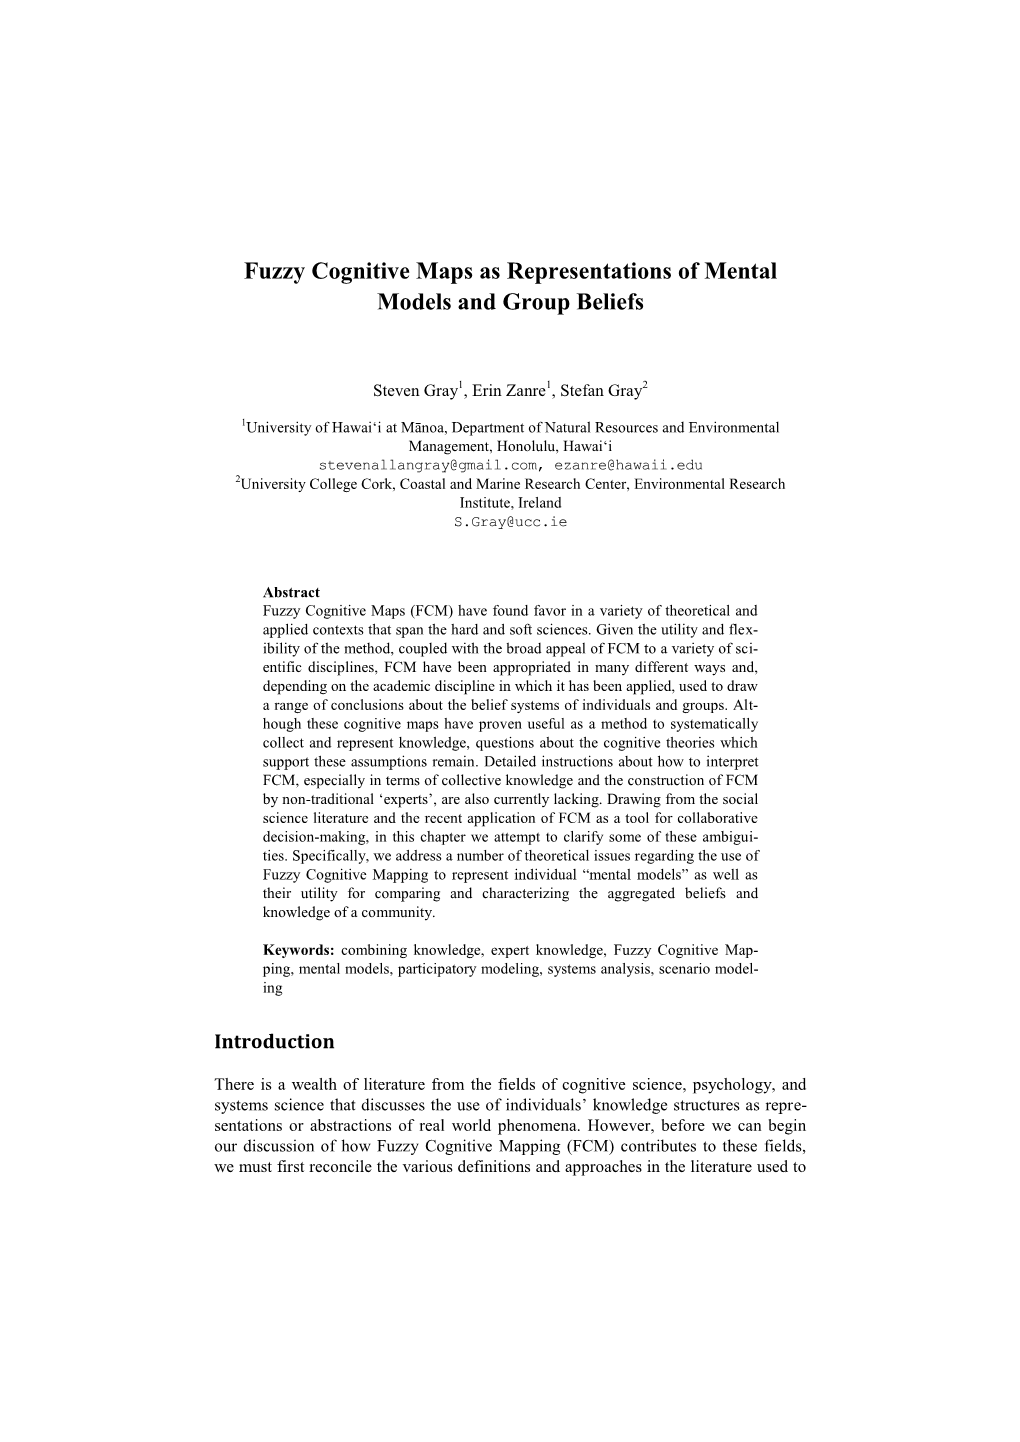 Fuzzy Cognitive Maps As Representations of Mental Models and Group Beliefs